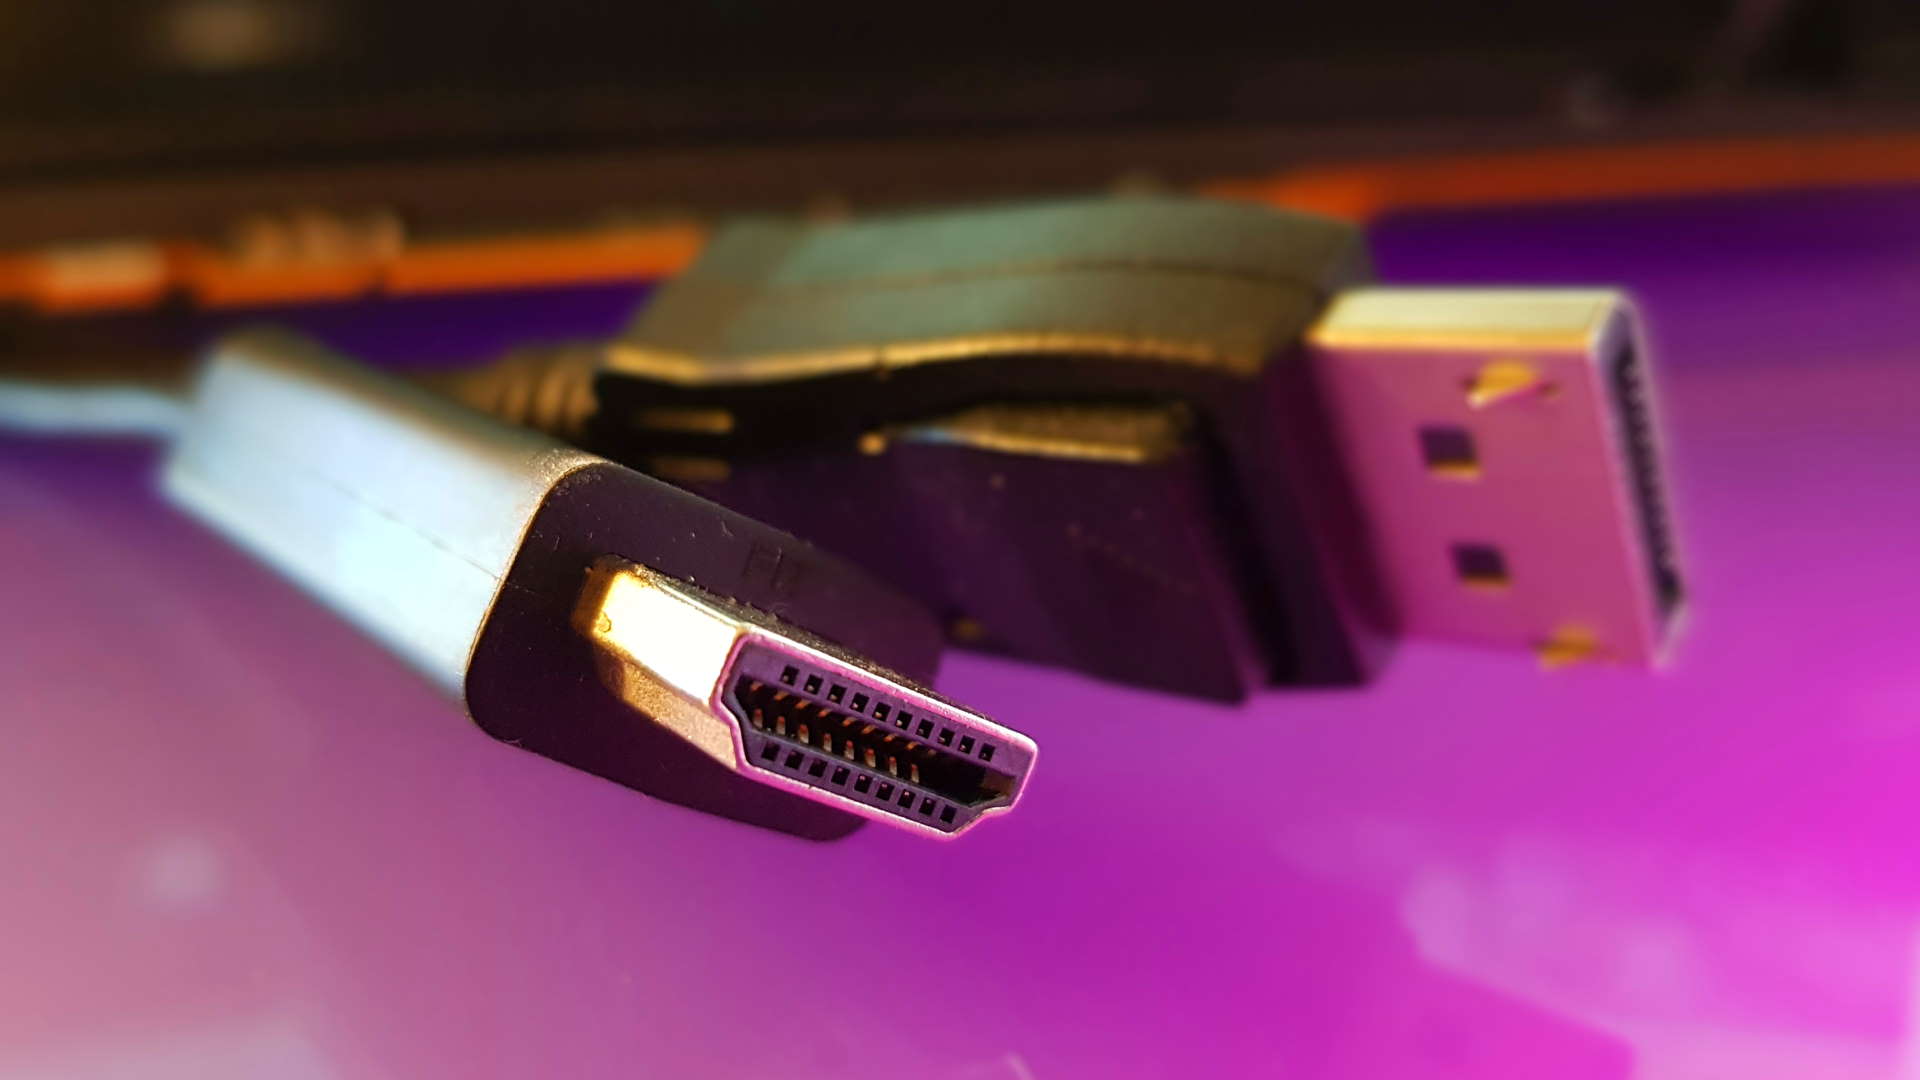 HDMI and DisplayPort cables